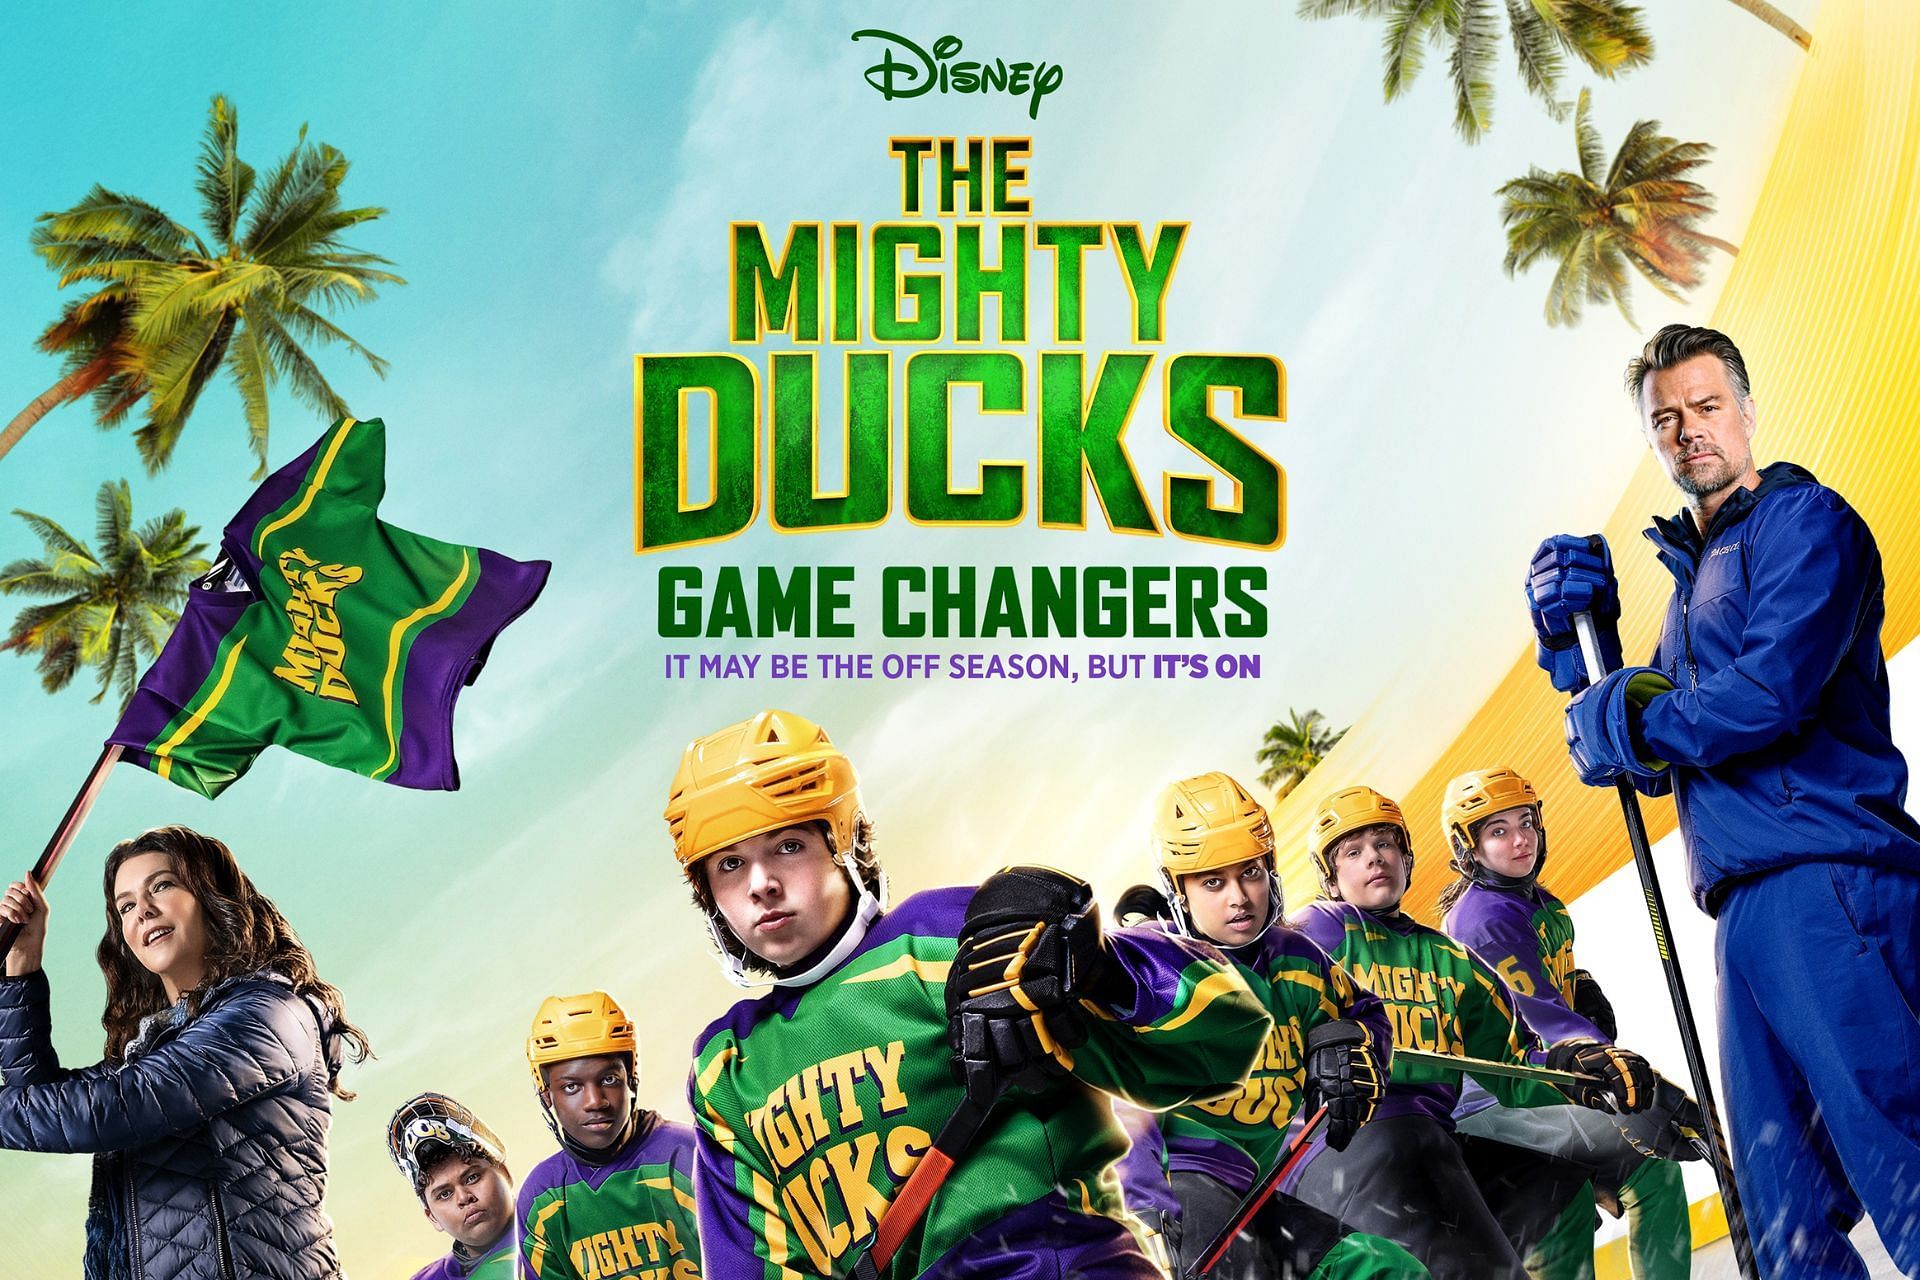 The Mighty Ducks: Game Changers' Cast on Disney+: Your Guide